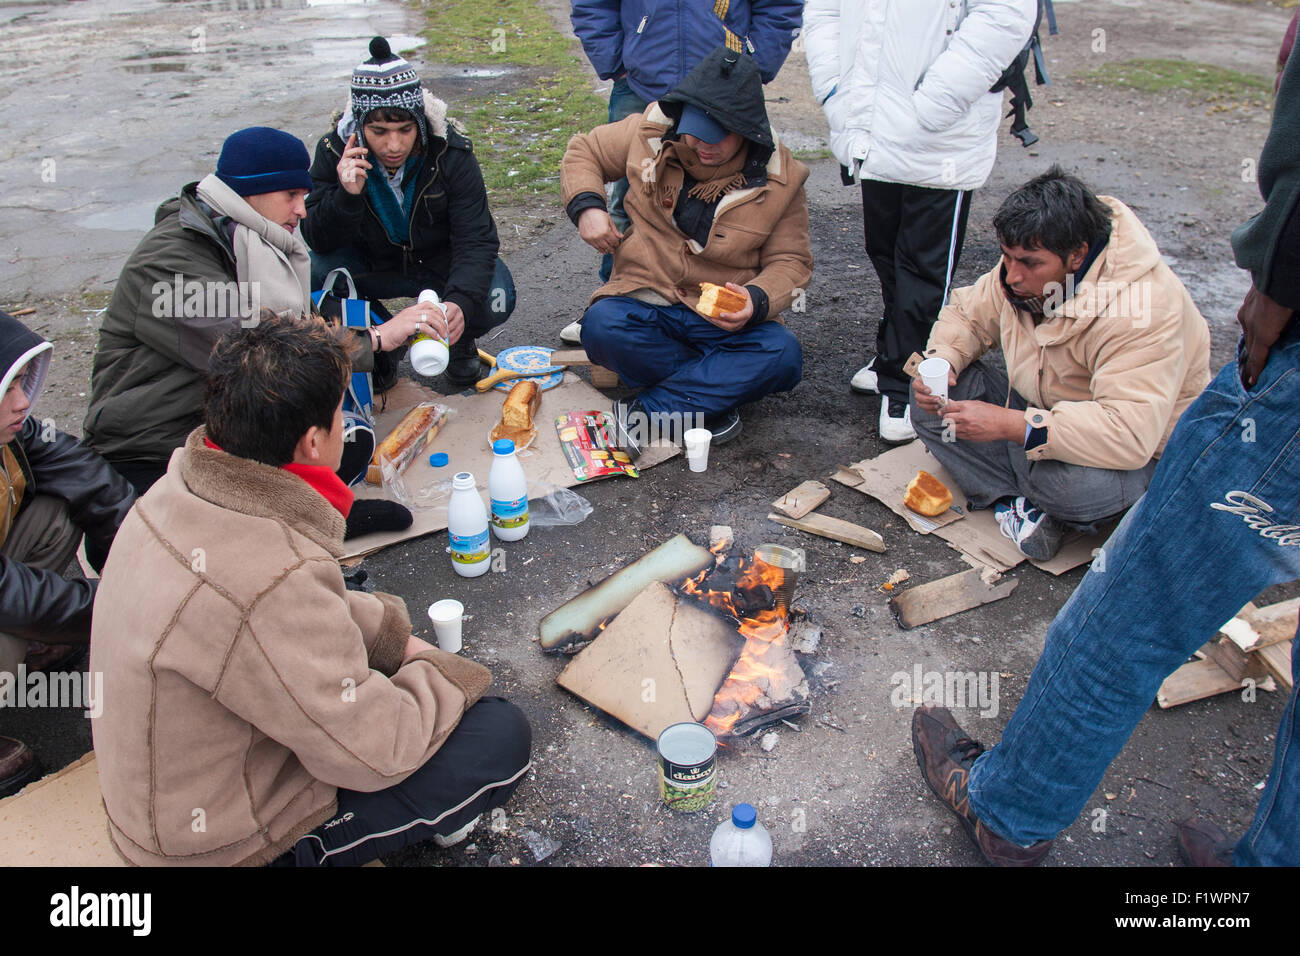 Illegal immigrants sharing breakfast in Calais, France Stock Photo